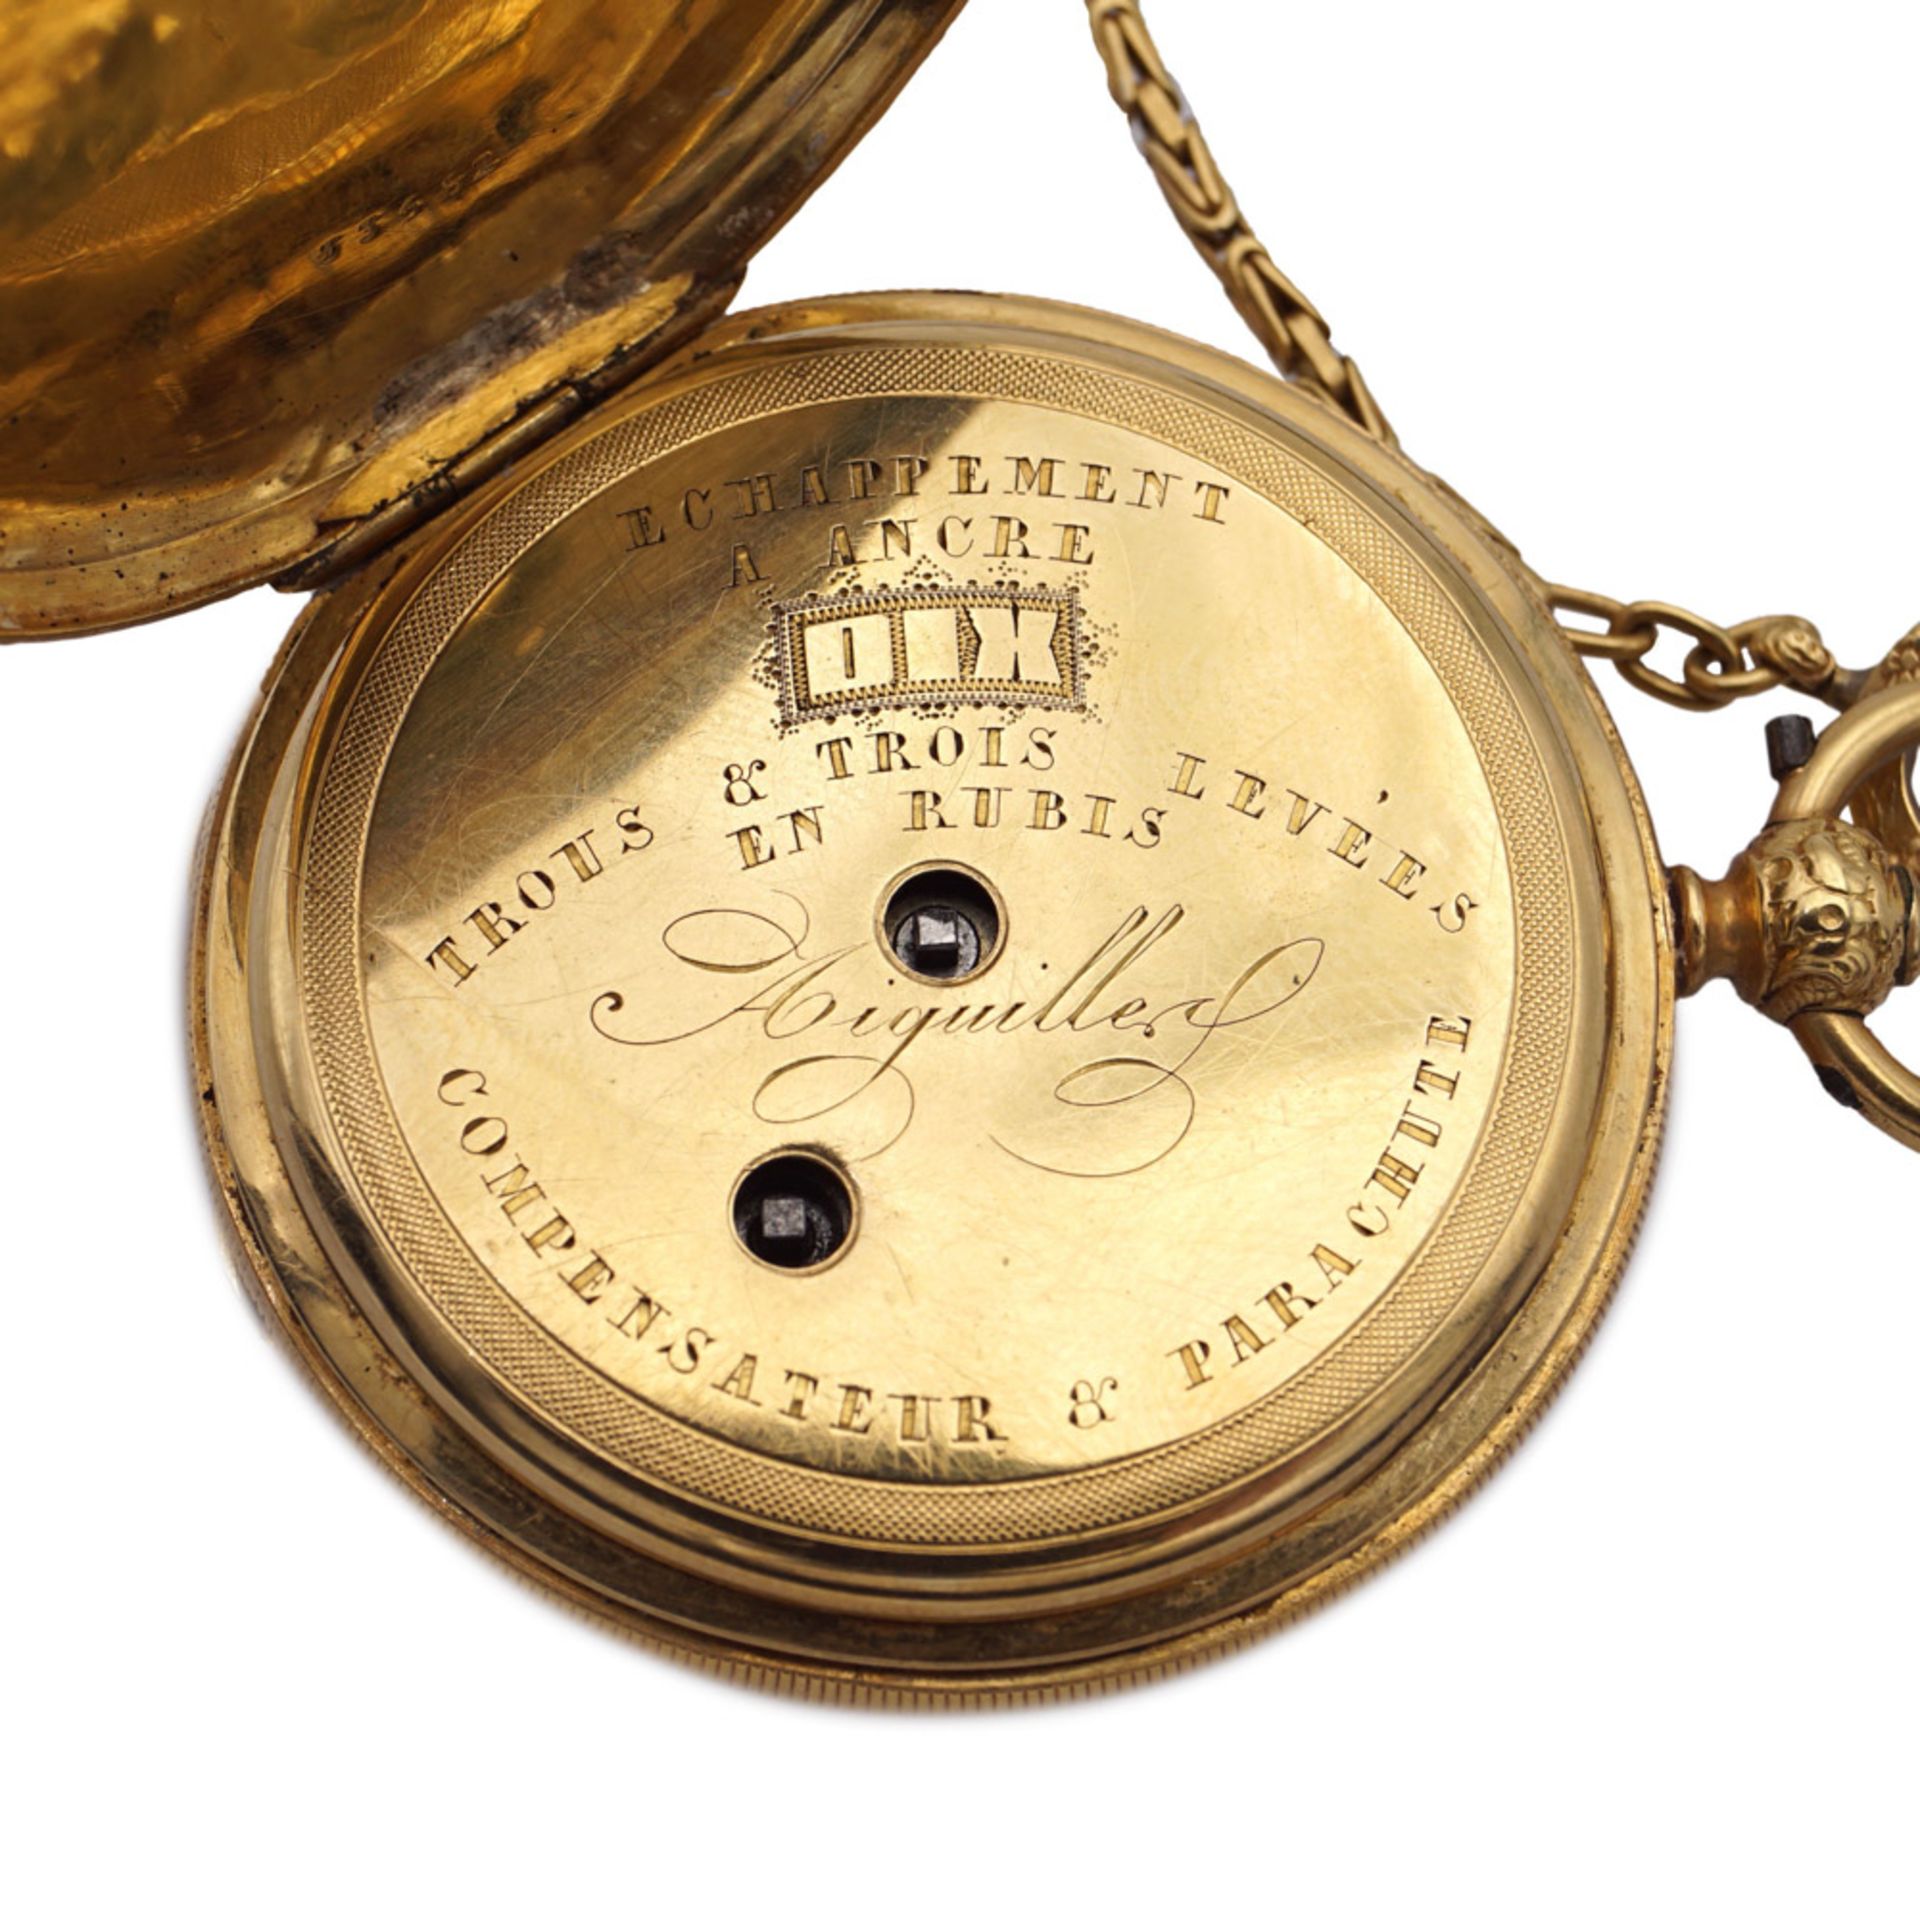 Aiguille, savonette pocket watch with chain and key - Image 4 of 4